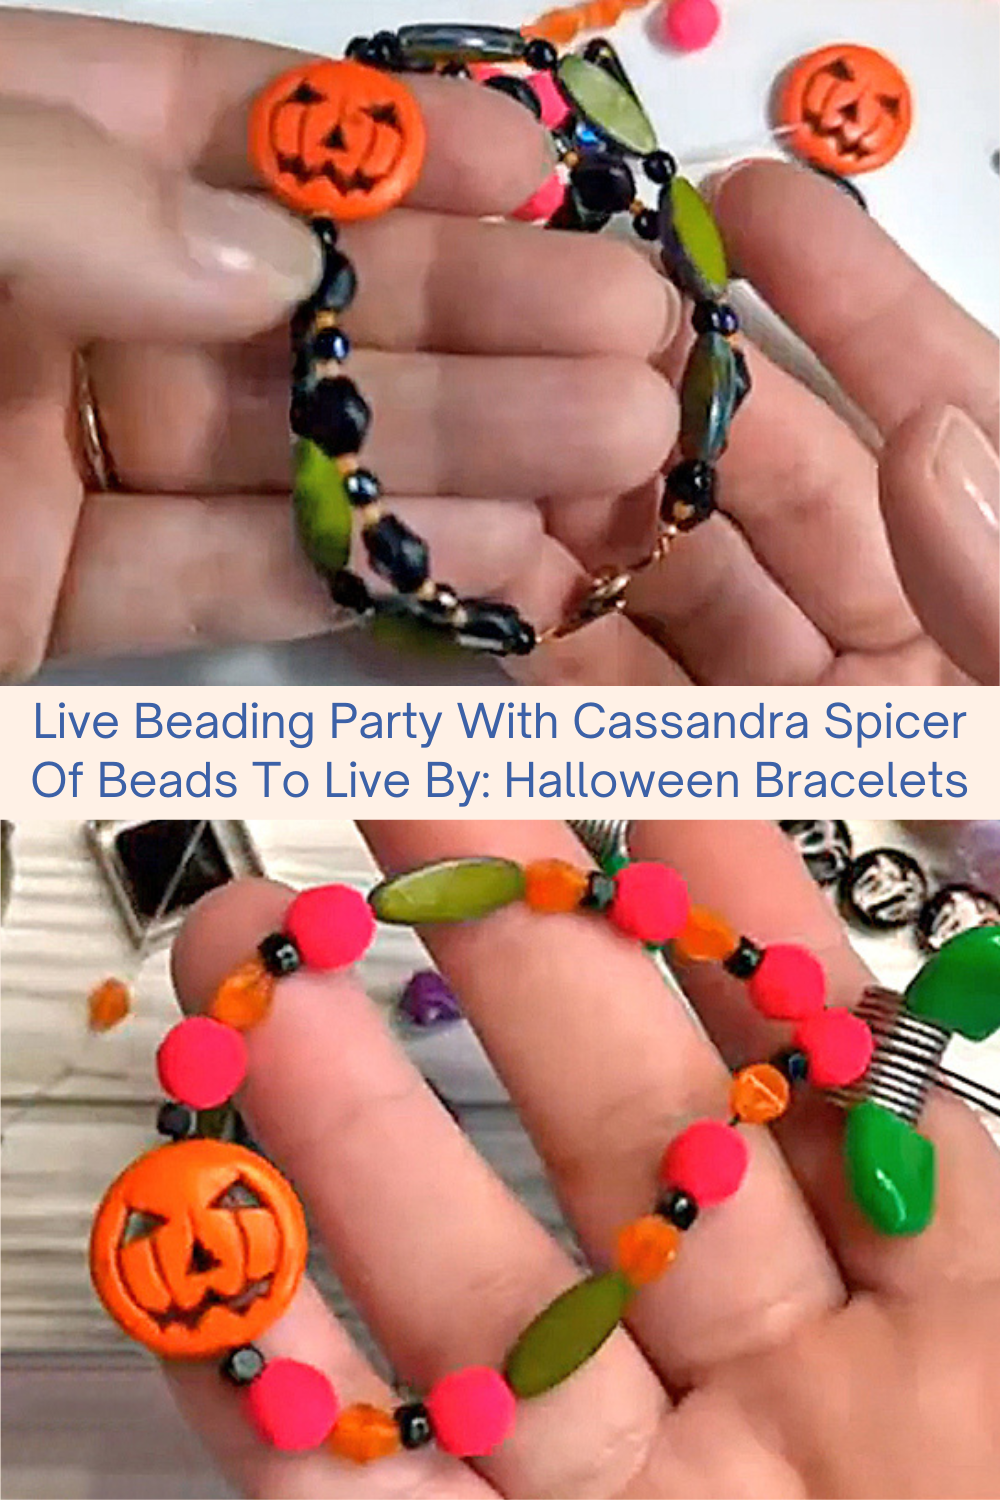 Live Beading Party With Cassandra Spicer Of Beads To Live By Halloween Bracelets Collage